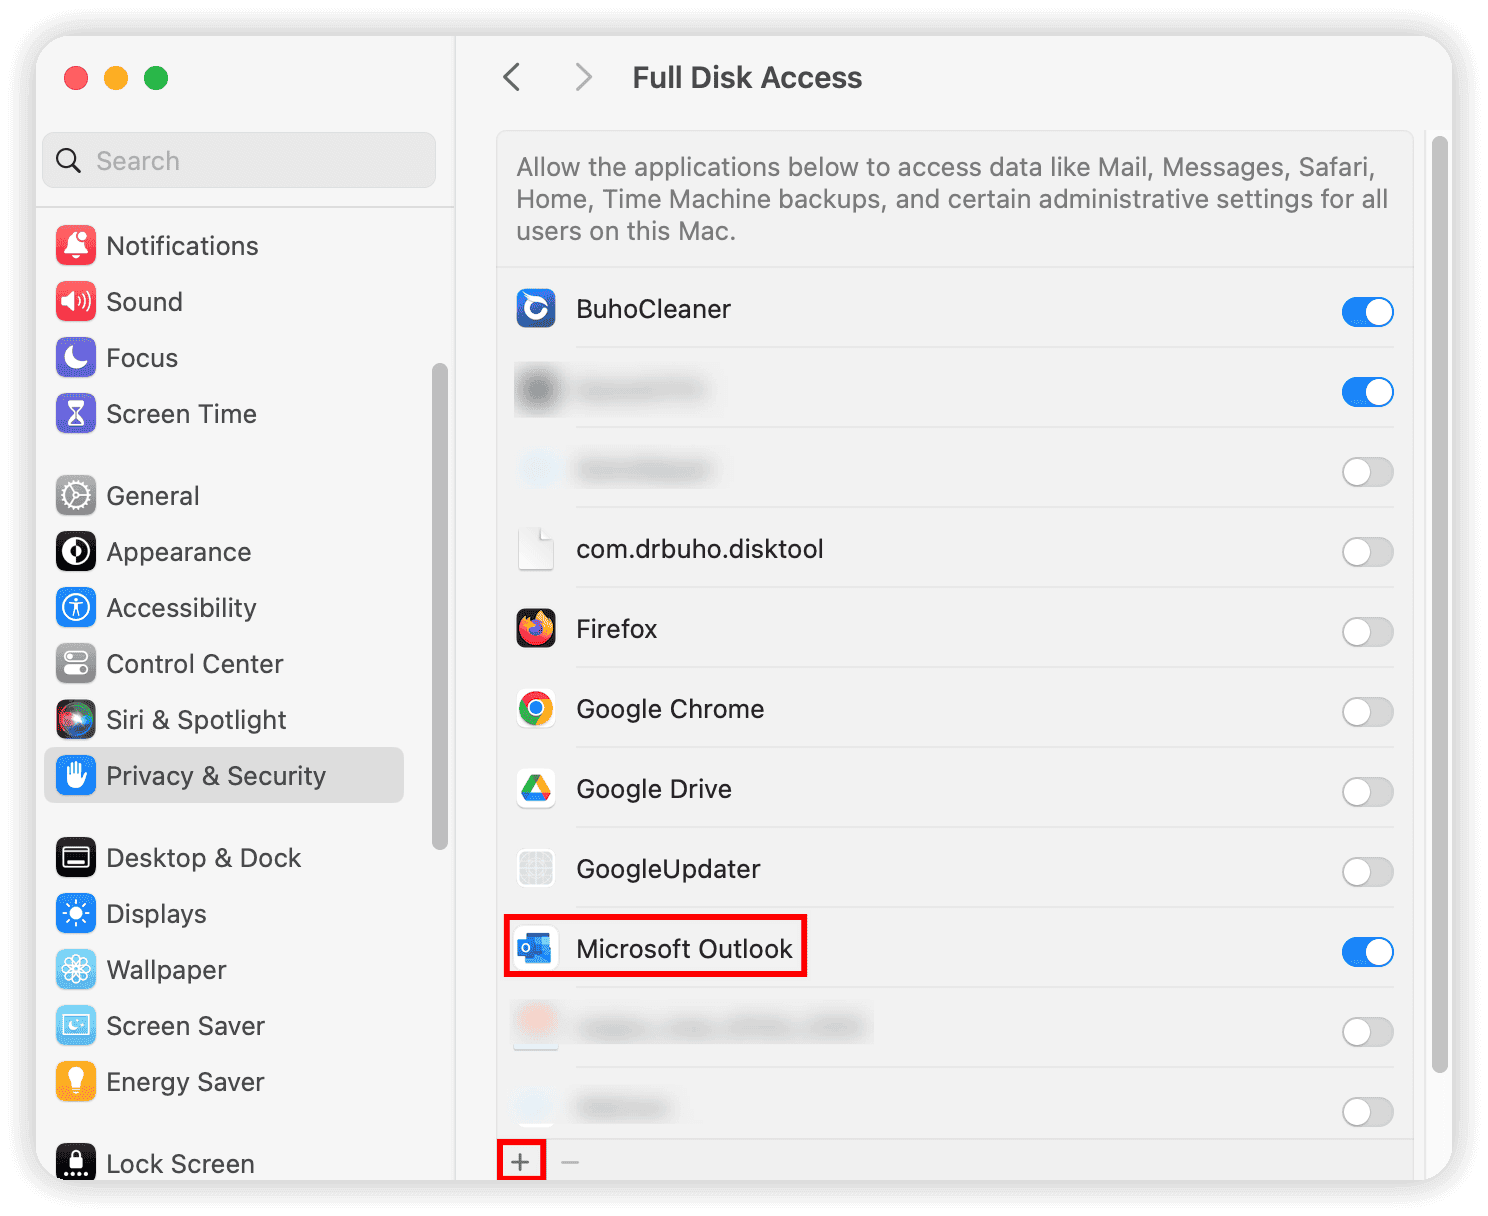 Add Full Disk Access for Outlook